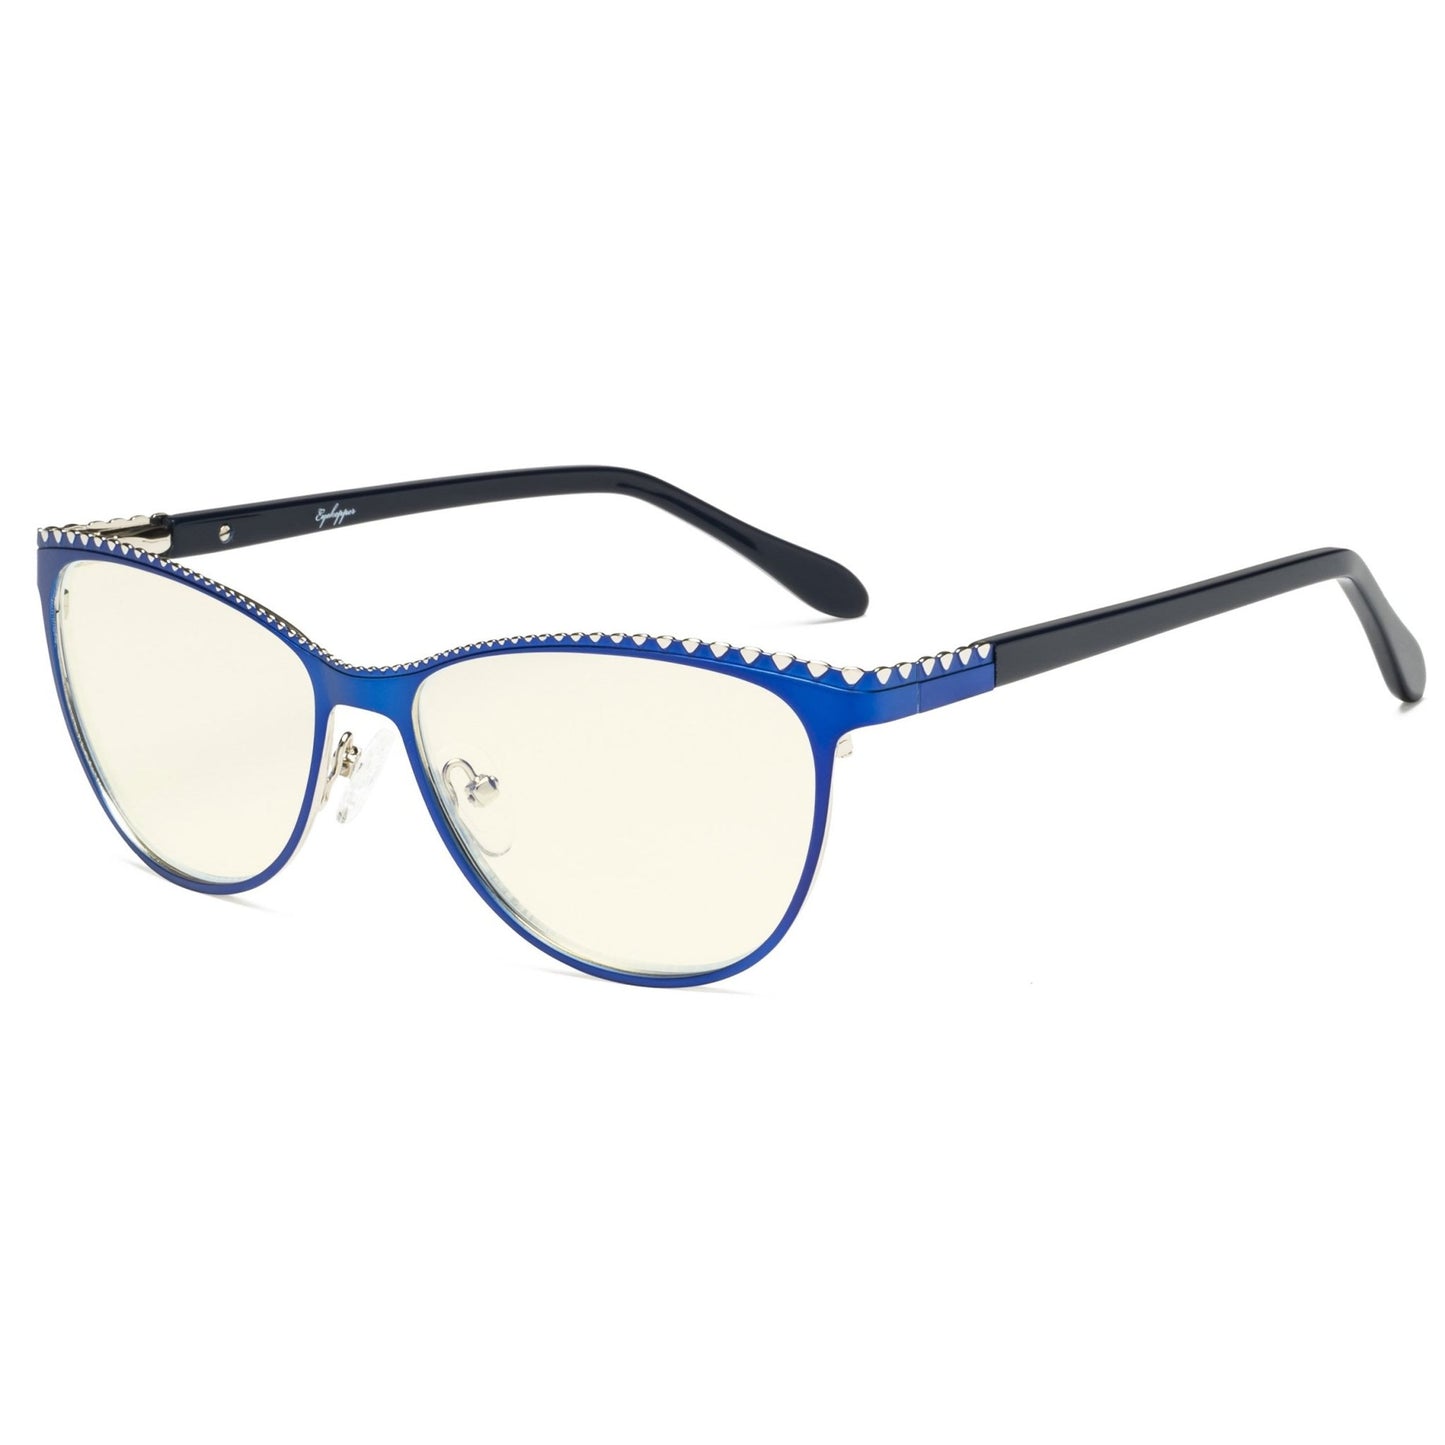 Computer Reading Glasses Blue Silver LX17014